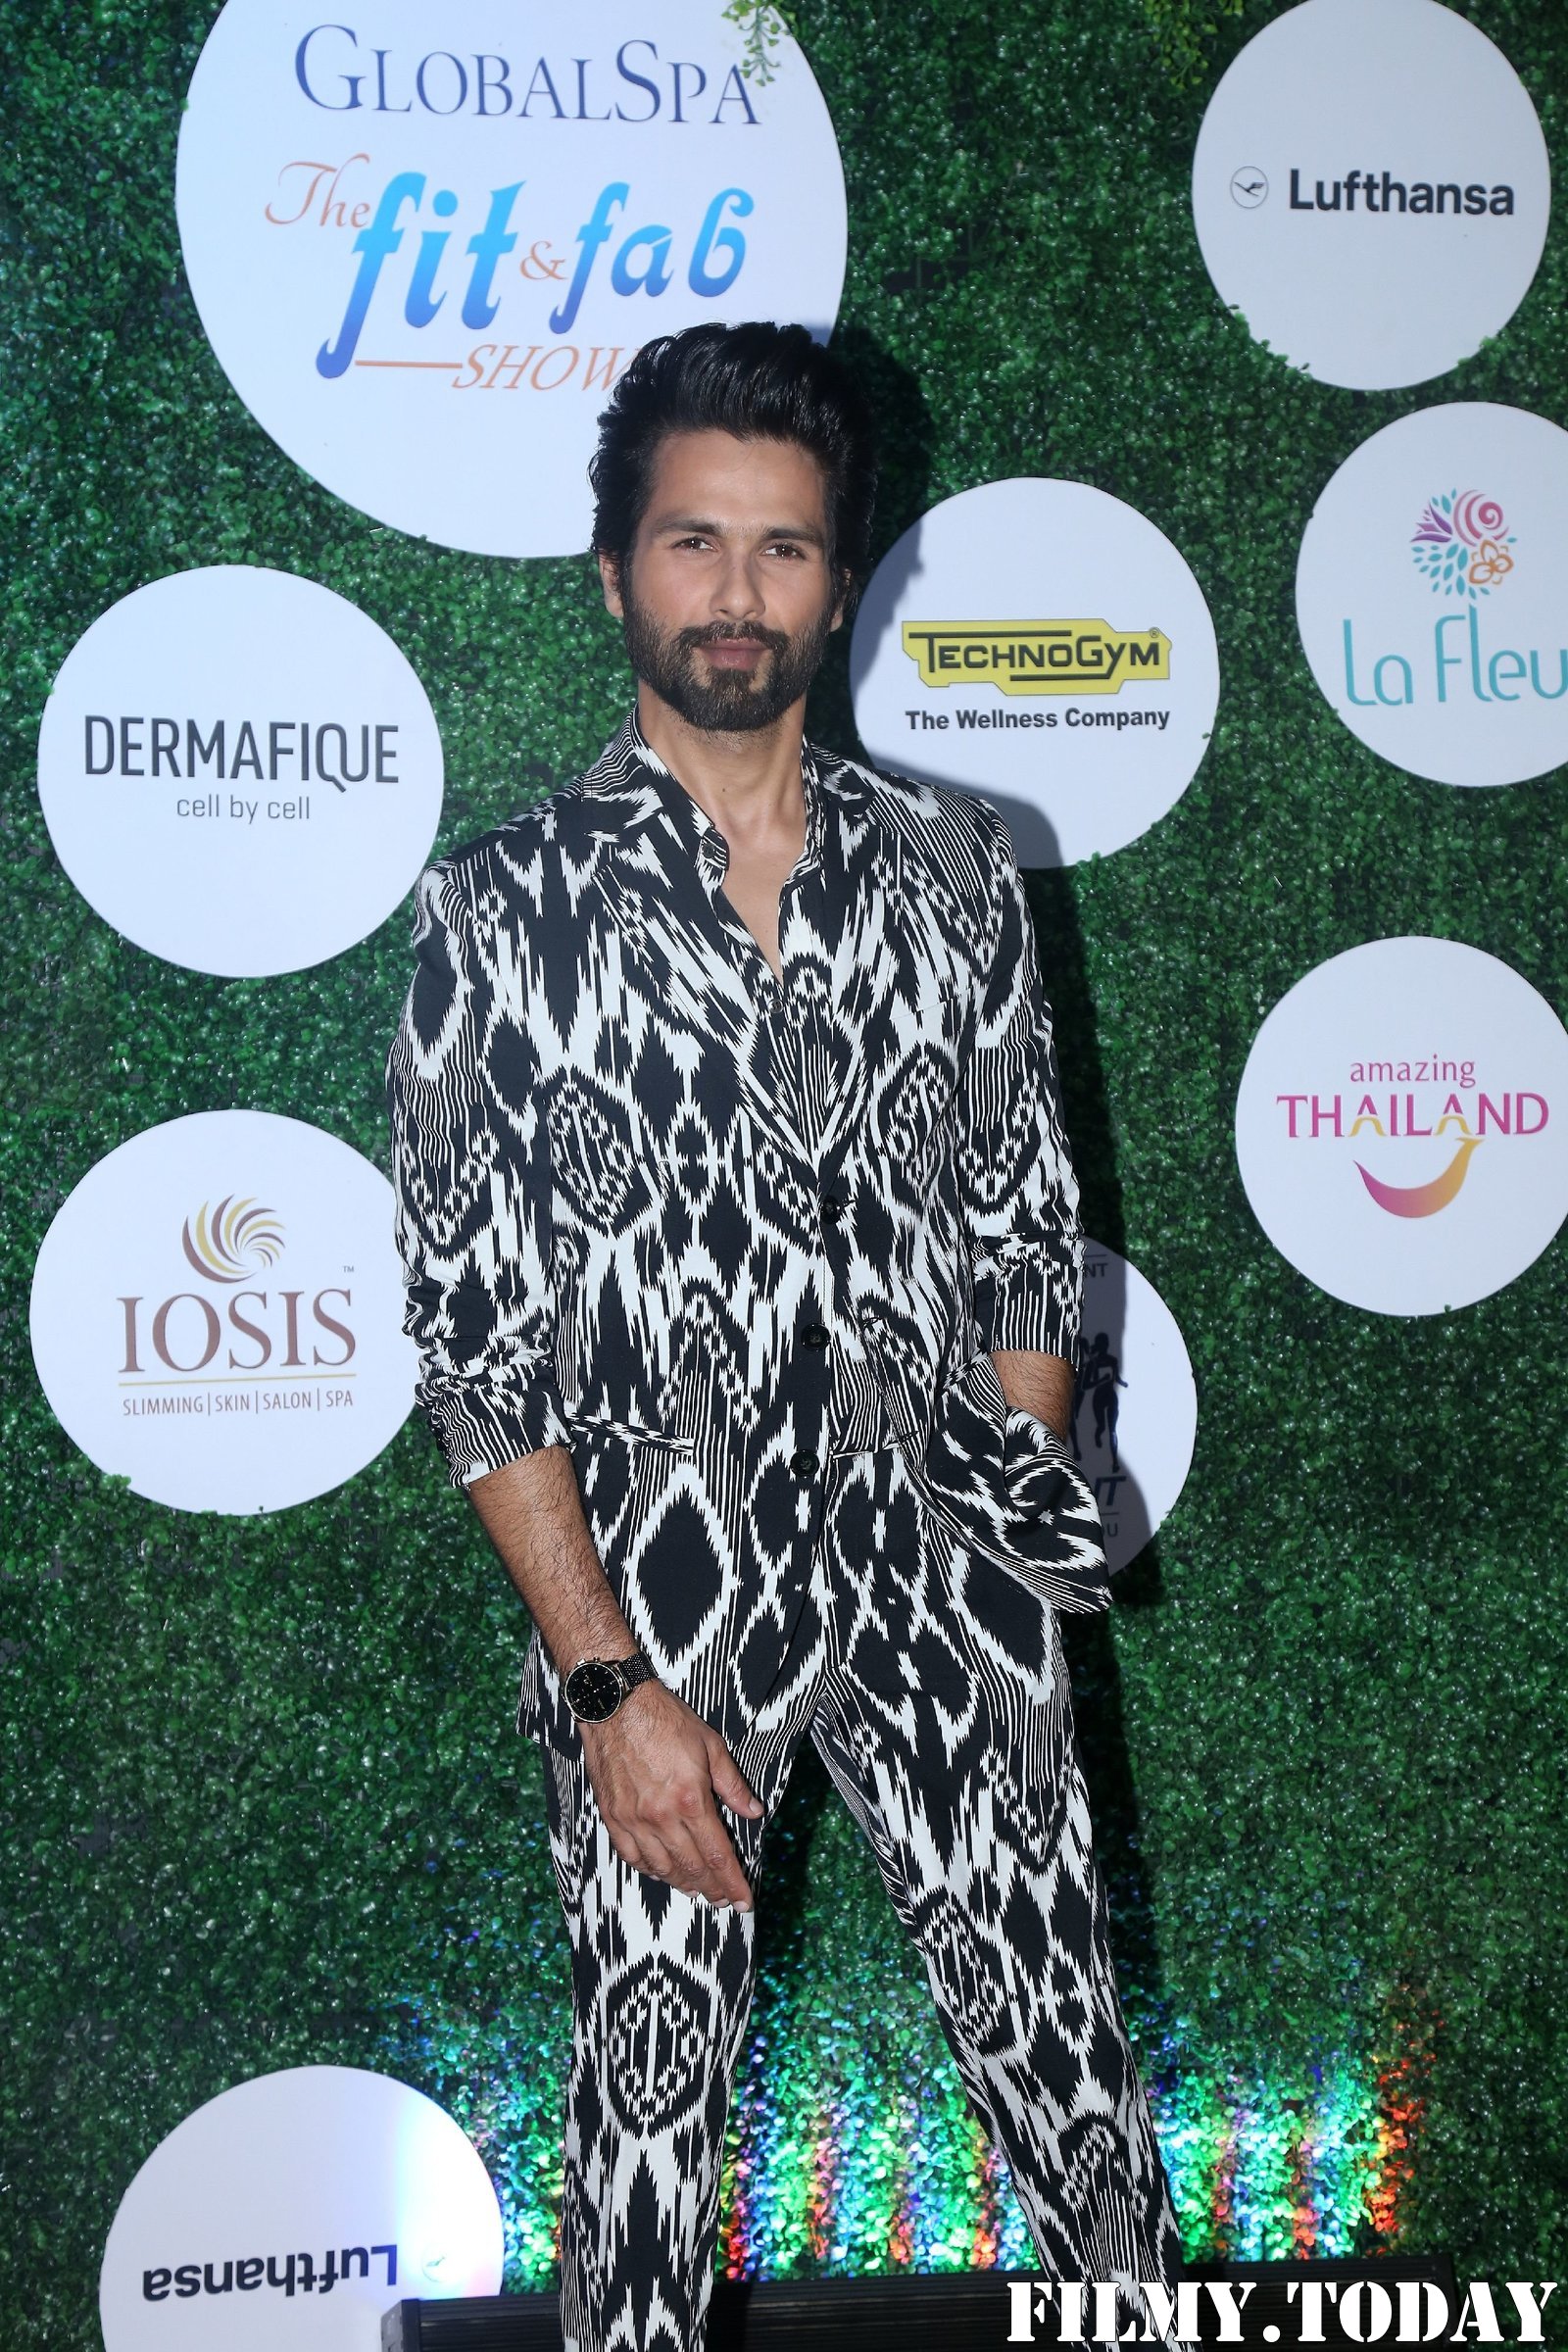 Shahid Kapoor - Photos: Celebs At Global Spa Fit & Fab Awards 2019 | Picture 1698899